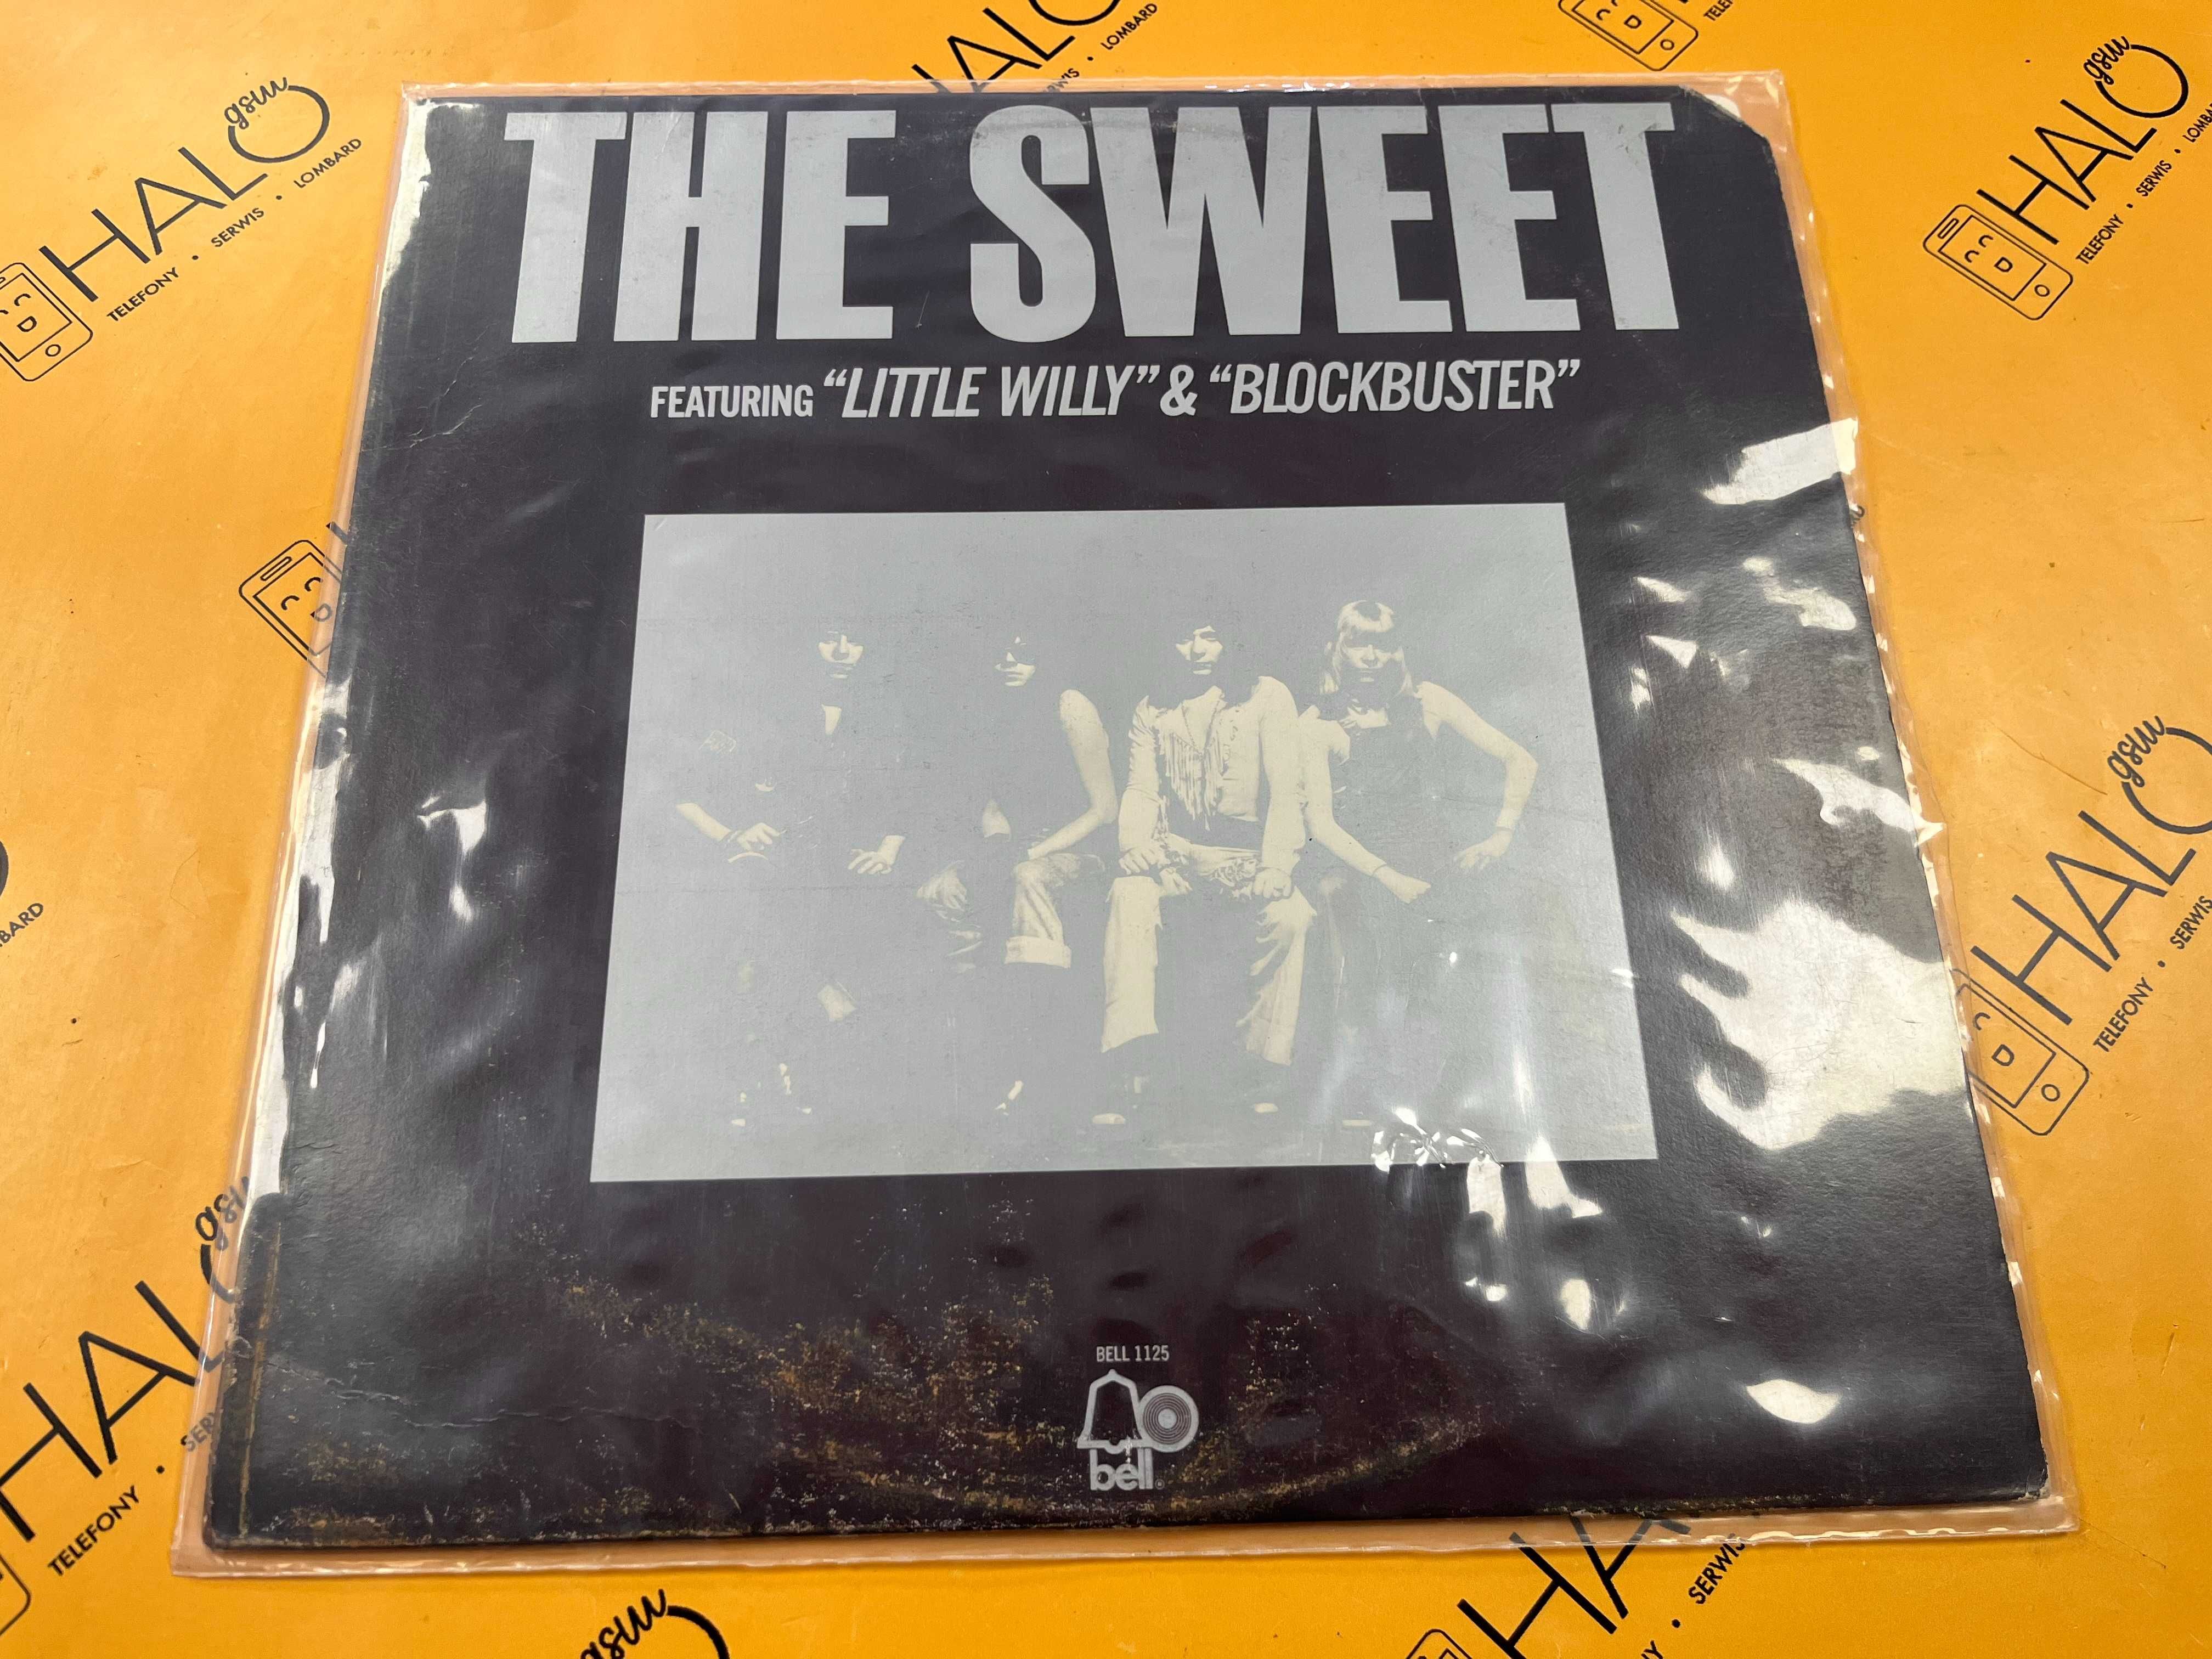 The Sweet - The Sweet Featuring "Little Willy" & "Blockbuster" (Bell)